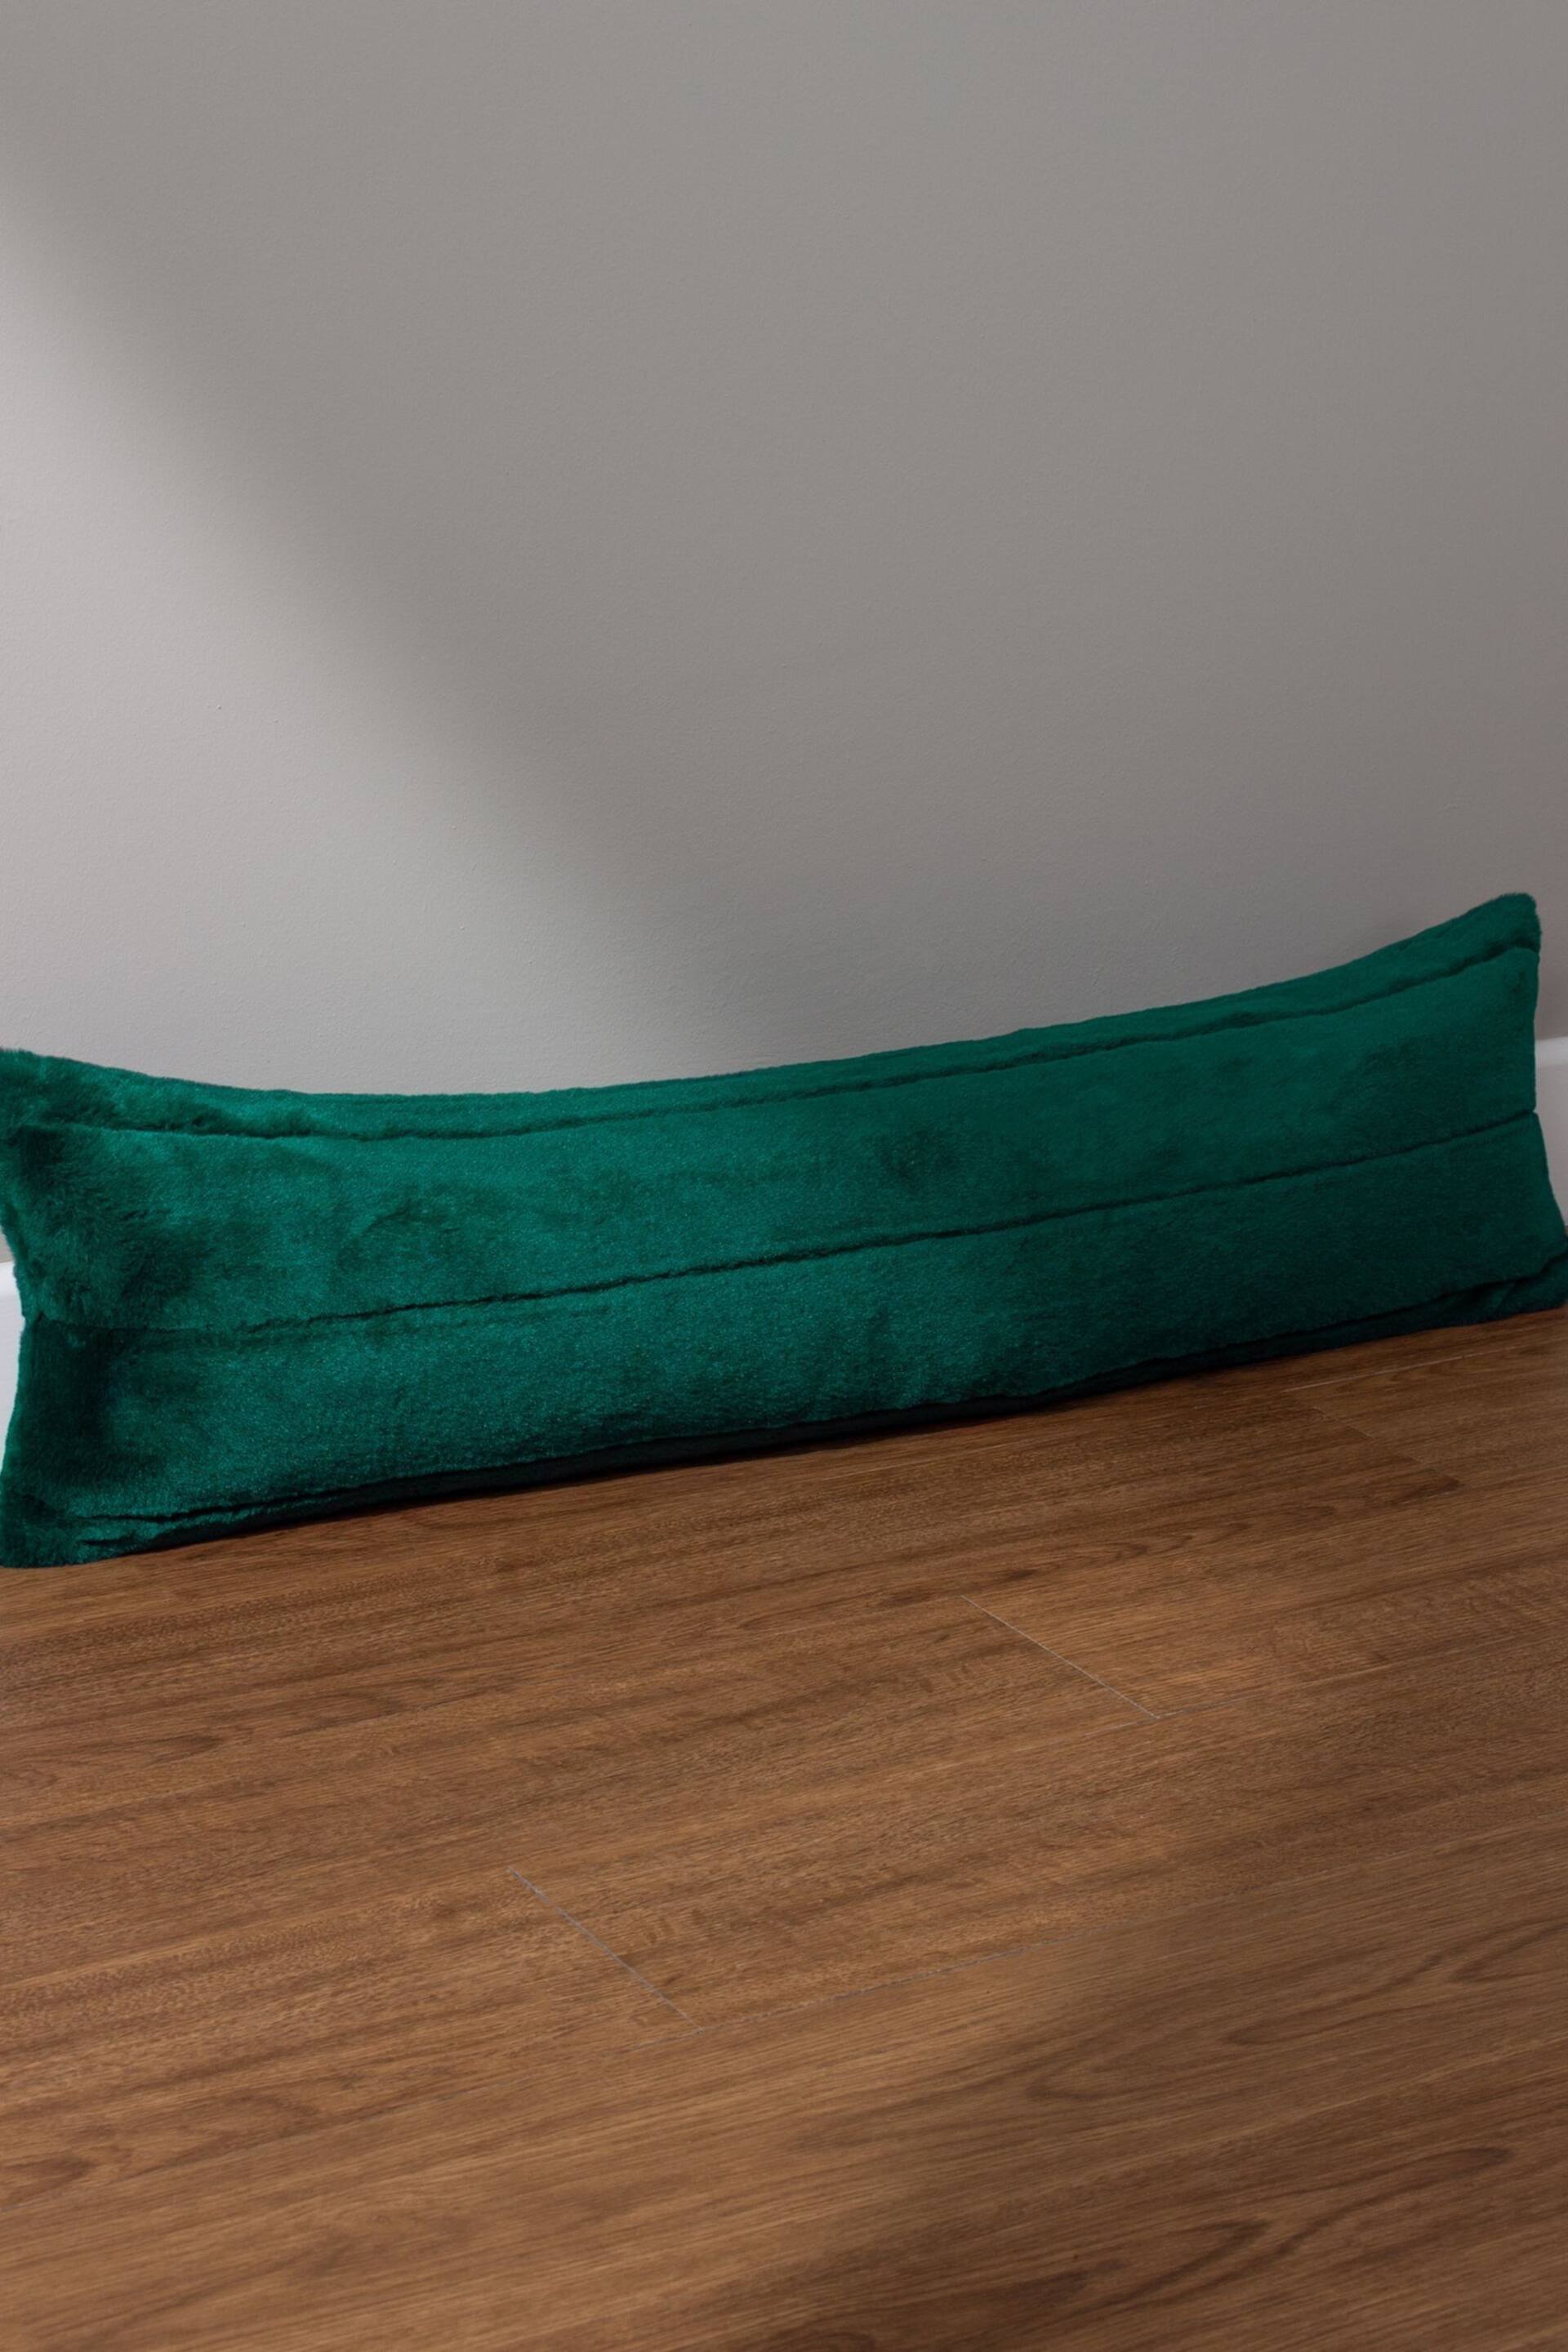 Paoletti Green Empress Faux Fur Draught Excluder - Image 1 of 2